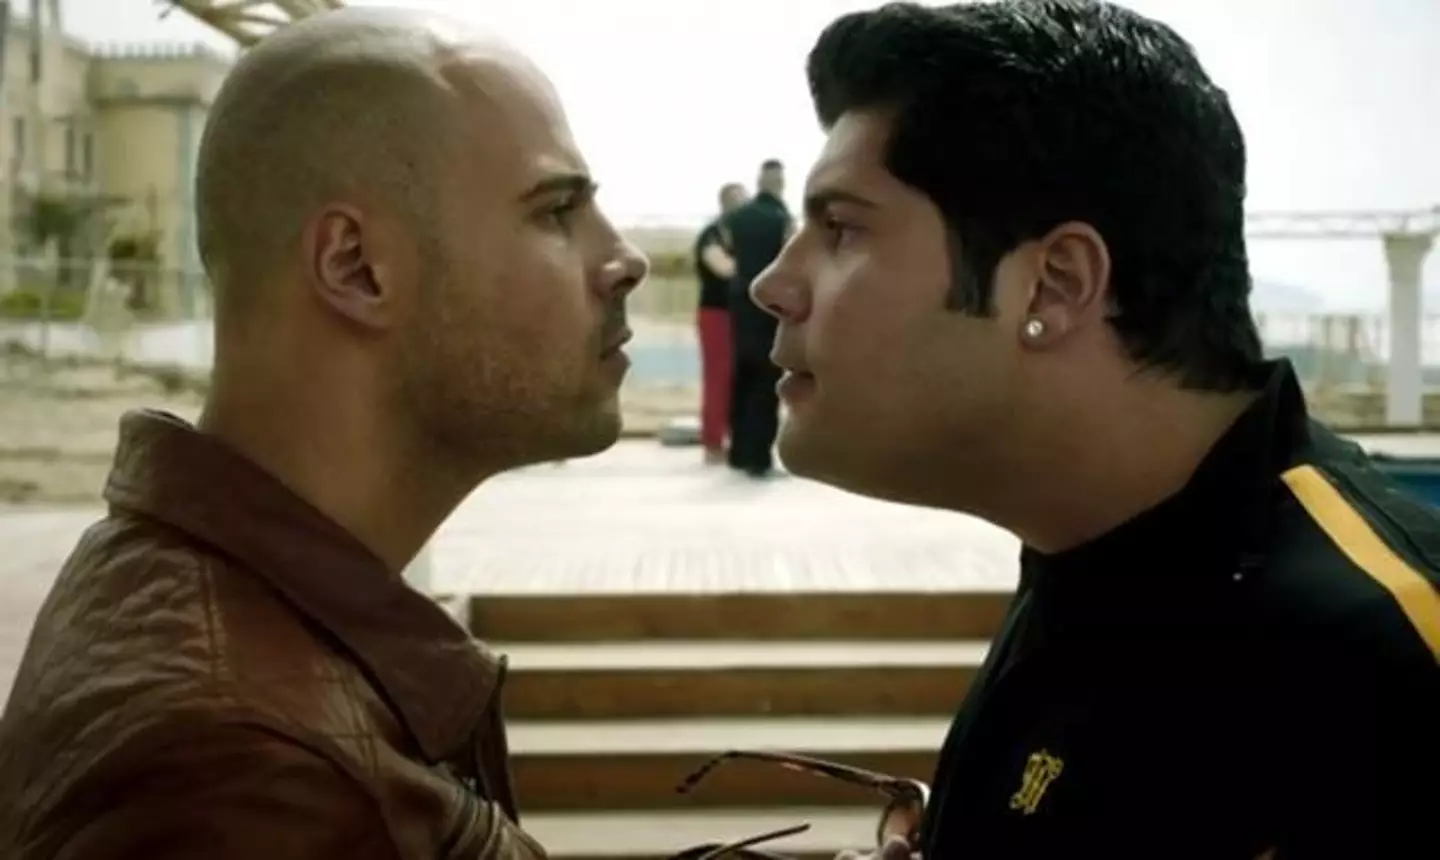 Fans of Narcos are being urged to watch Gomorrah.